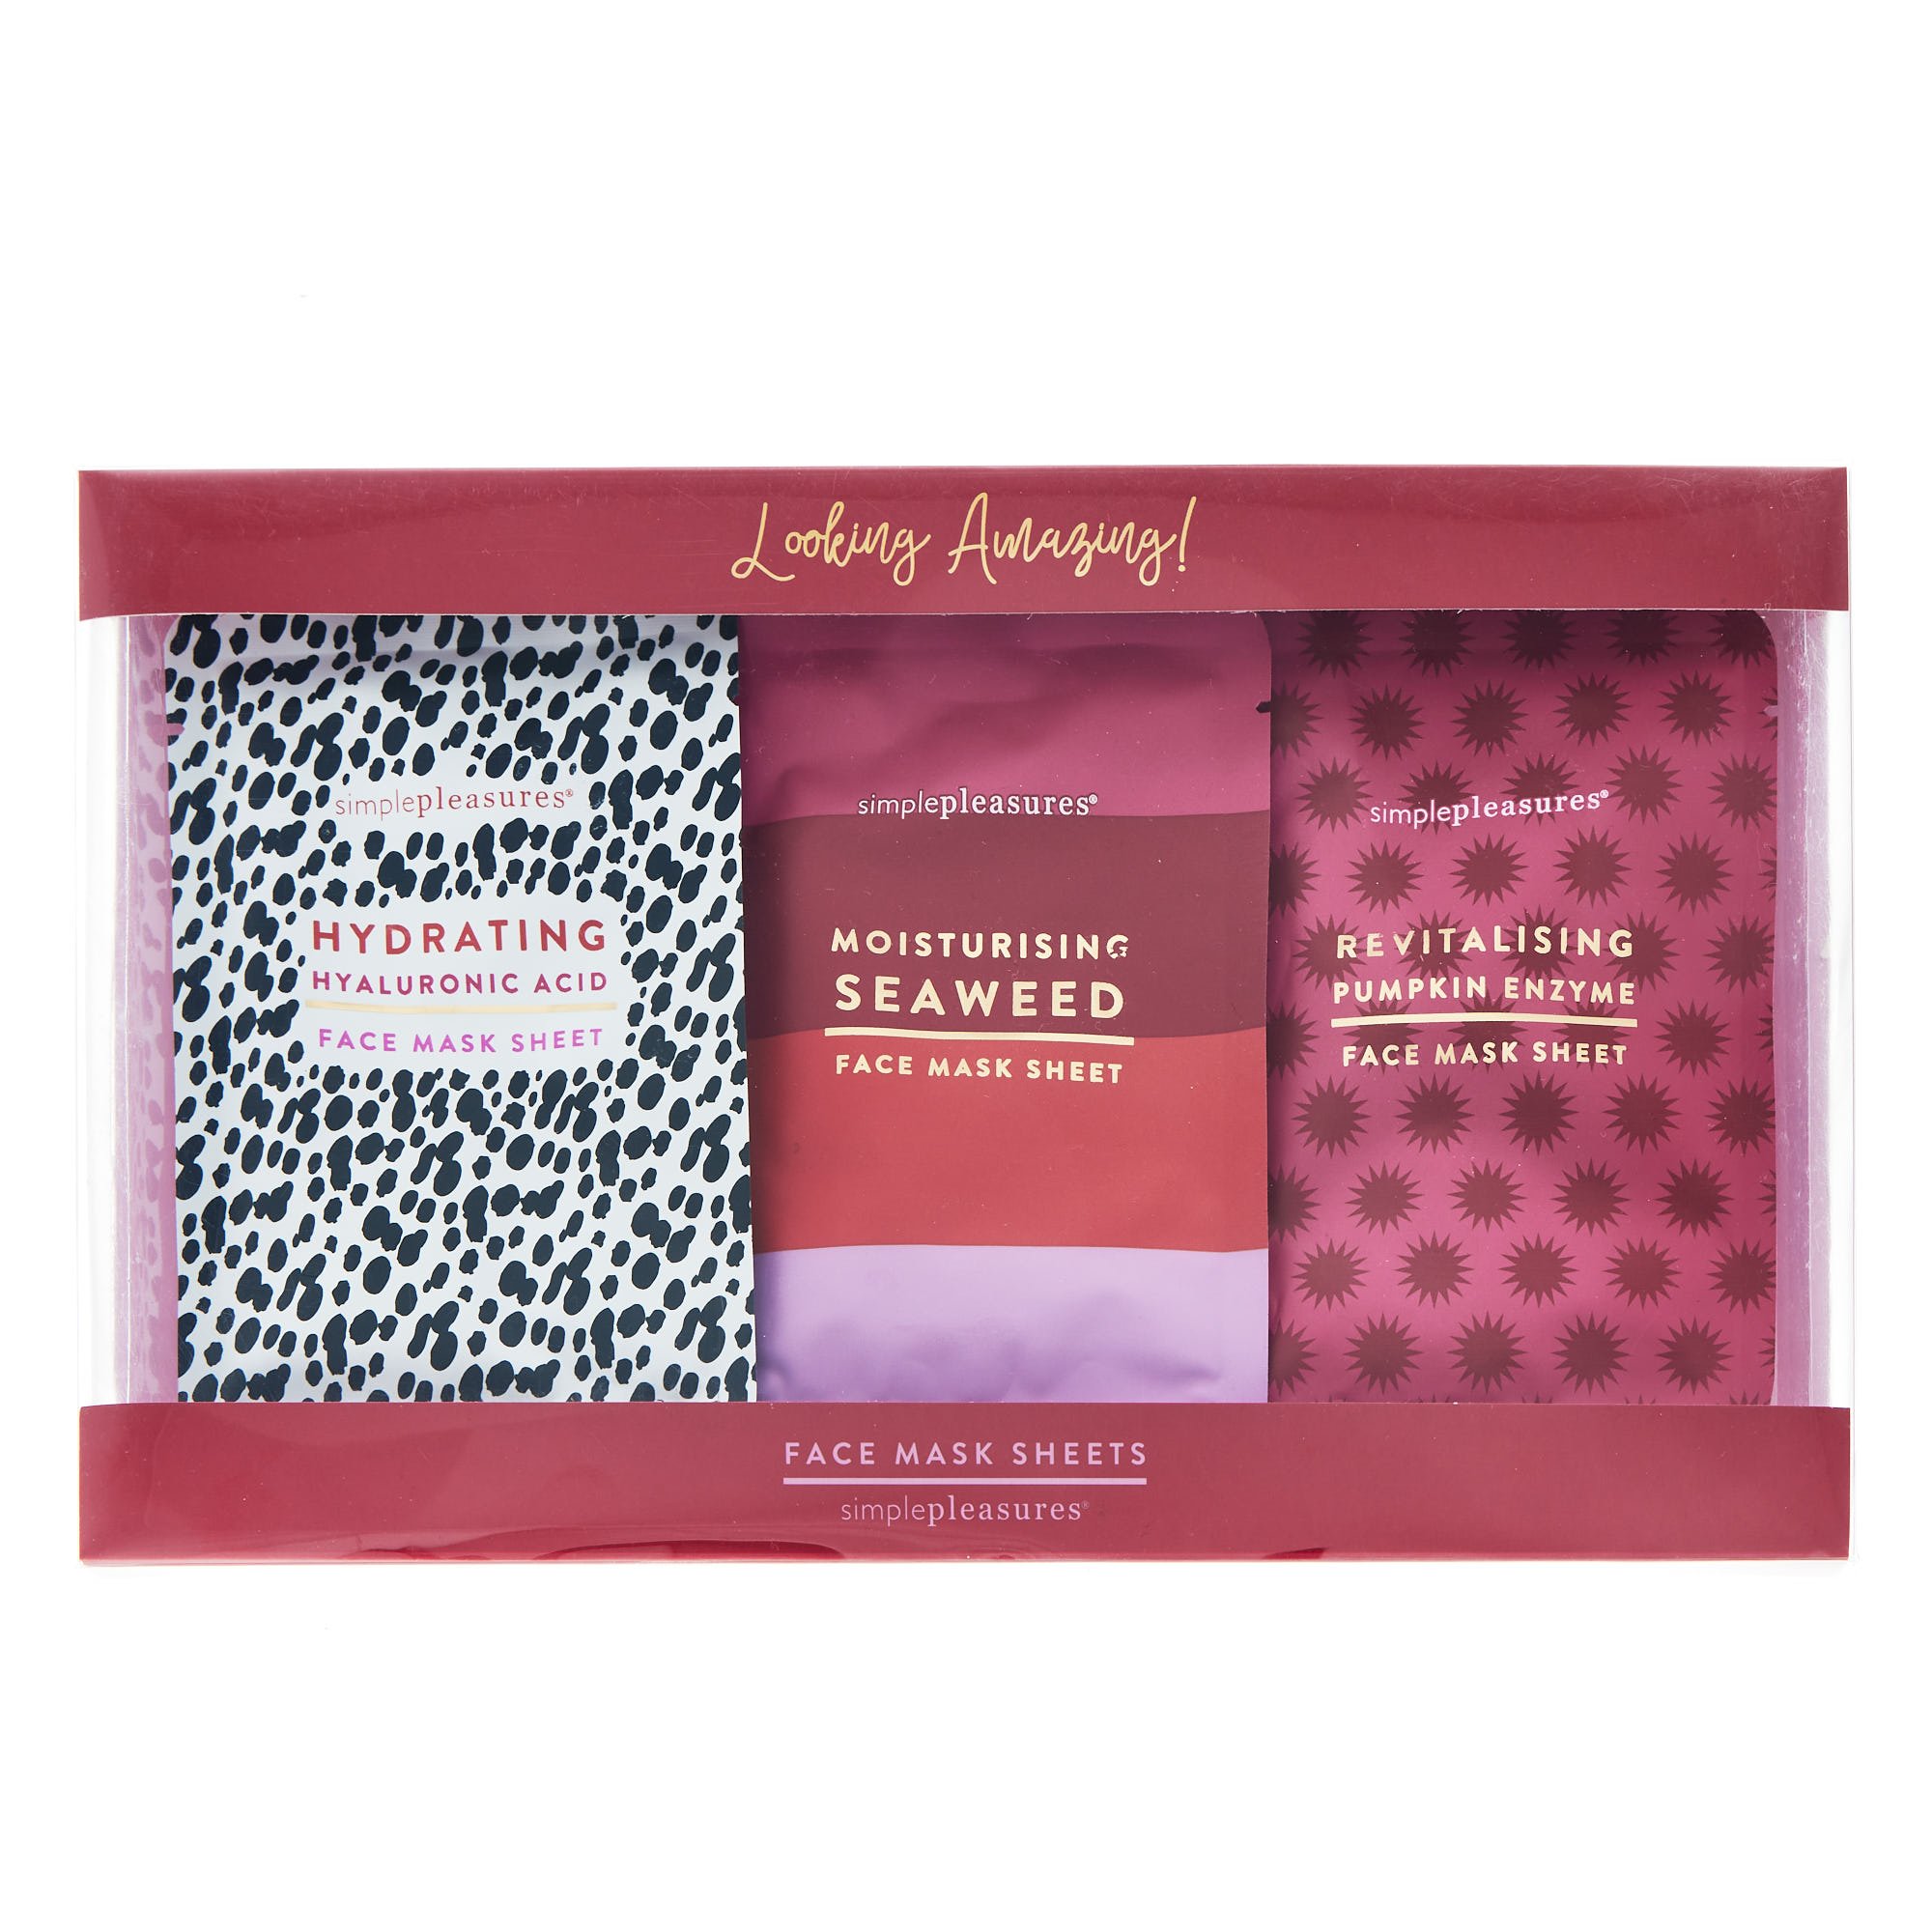 Looking Amazing Face Mask Sheets - Pack of 3